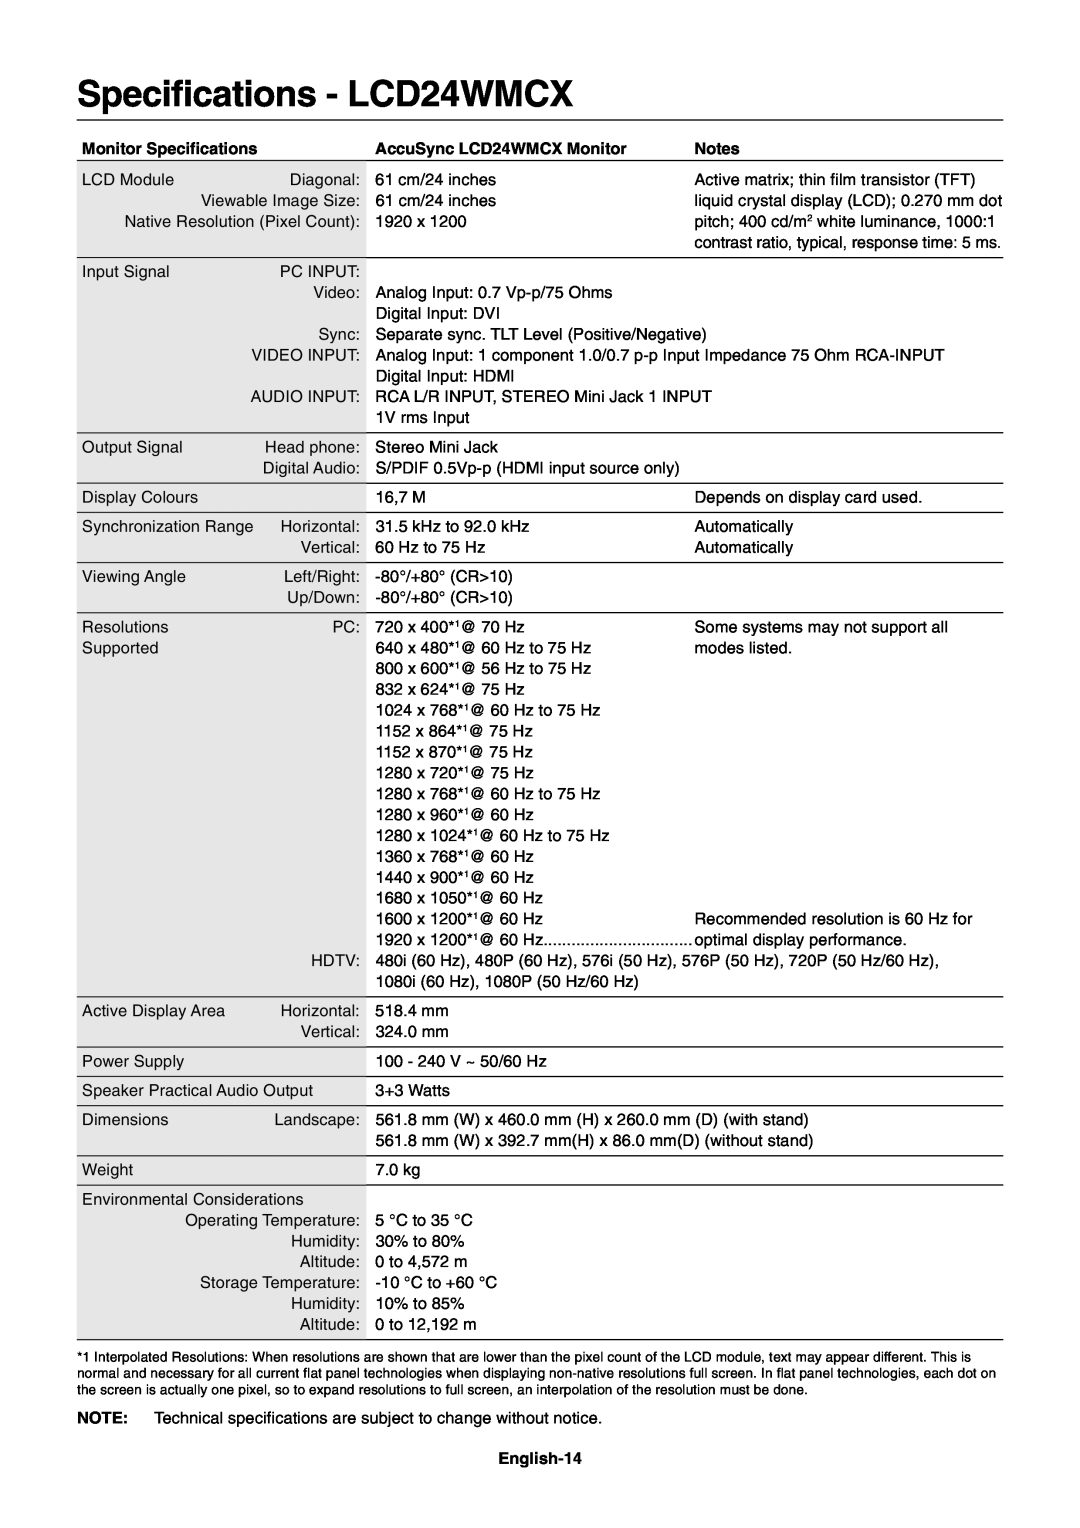 NEC LCD22WMGX user manual Specifications - LCD24WMCX, Monitor Specifications, AccuSync LCD24WMCX Monitor, English-14 